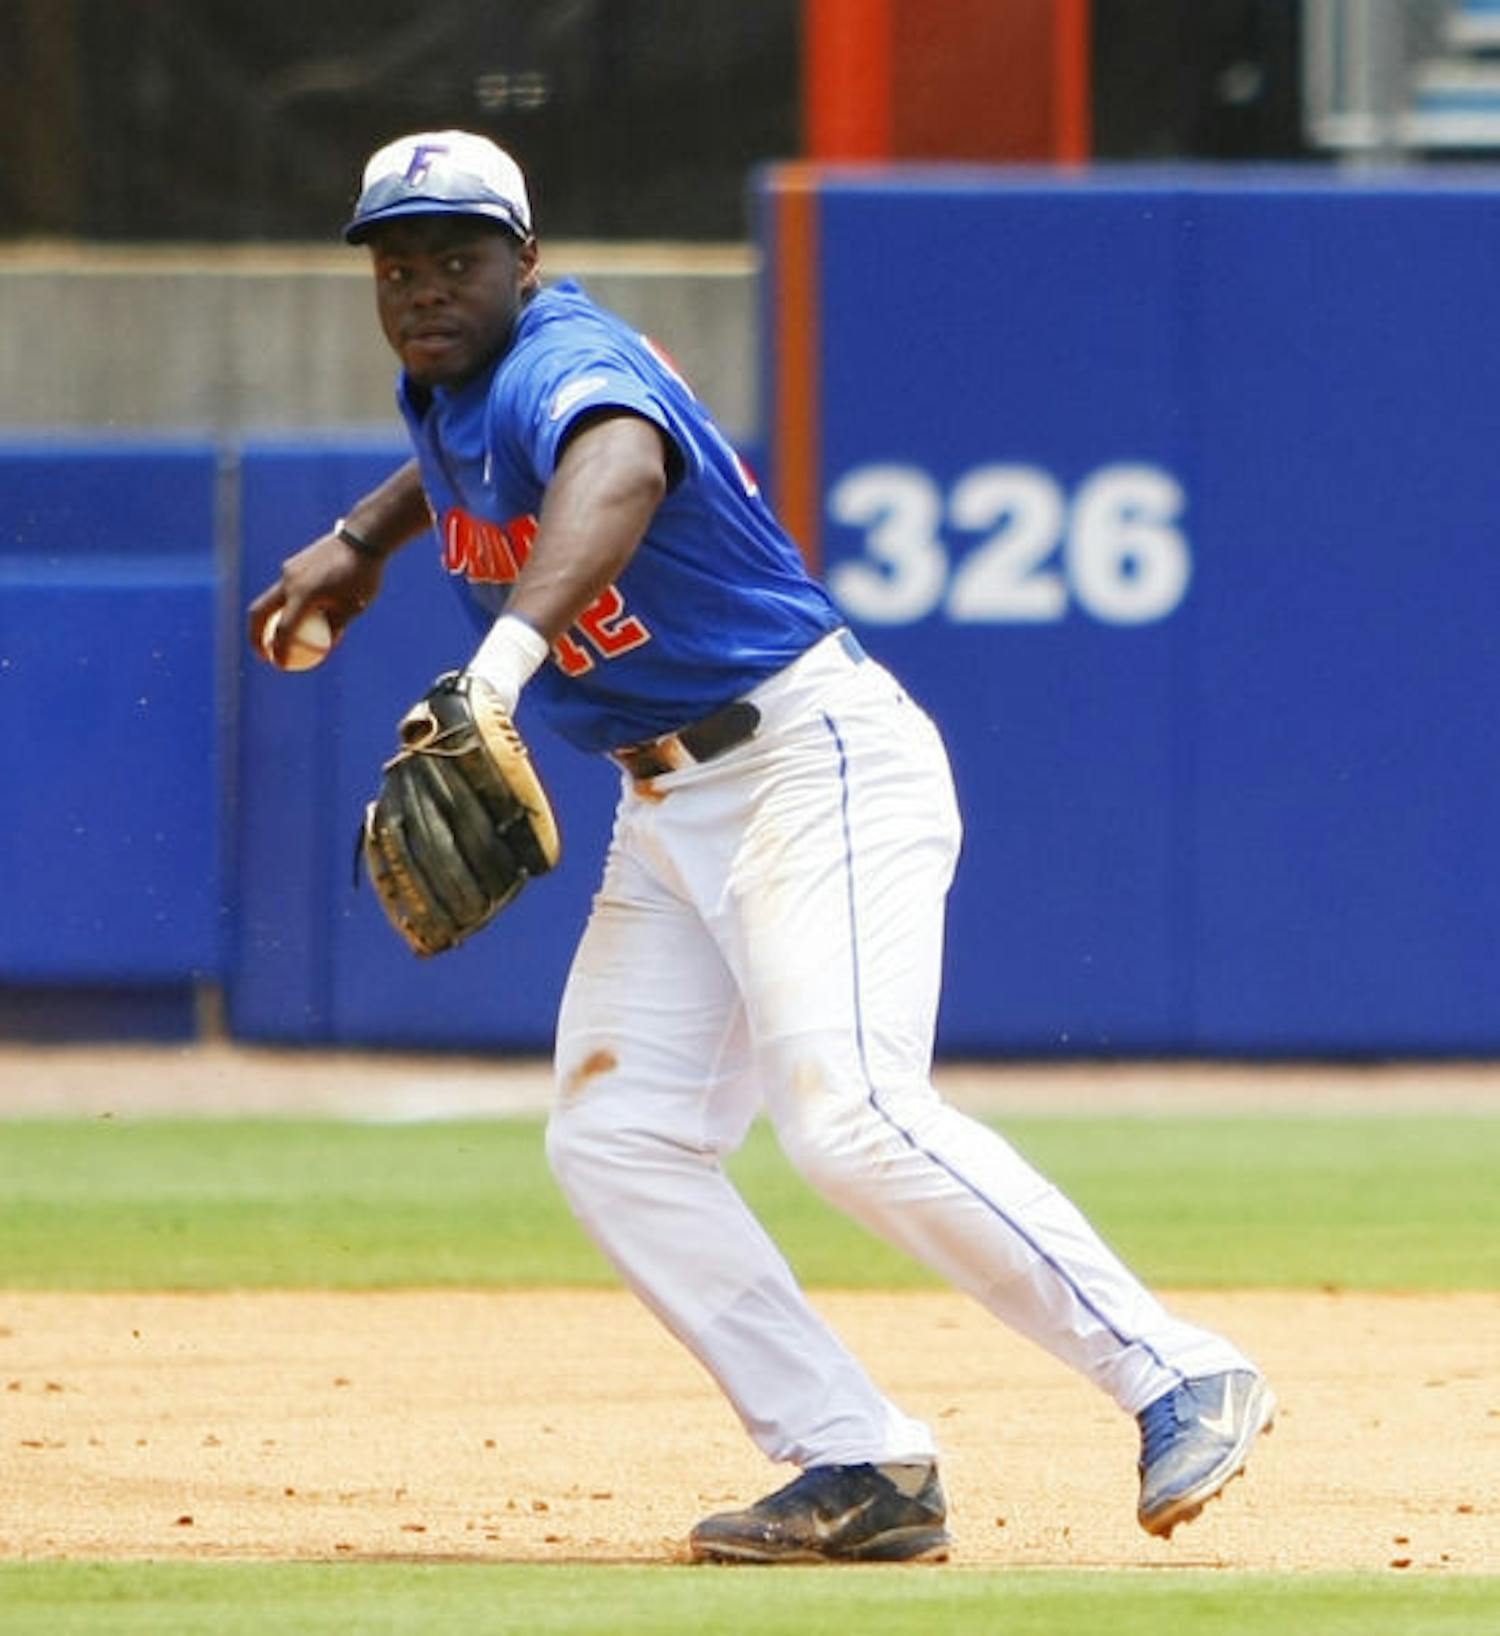 Josh Tobias throws the ball to first base during Florida’s 9-8 win against N.C. State in Game 2 of the NCAA Super Regional on June 10 at McKethan Stadium. Against Georgia on Friday, Tobias notched Florida's only RBI of the match on a ground-rule double.